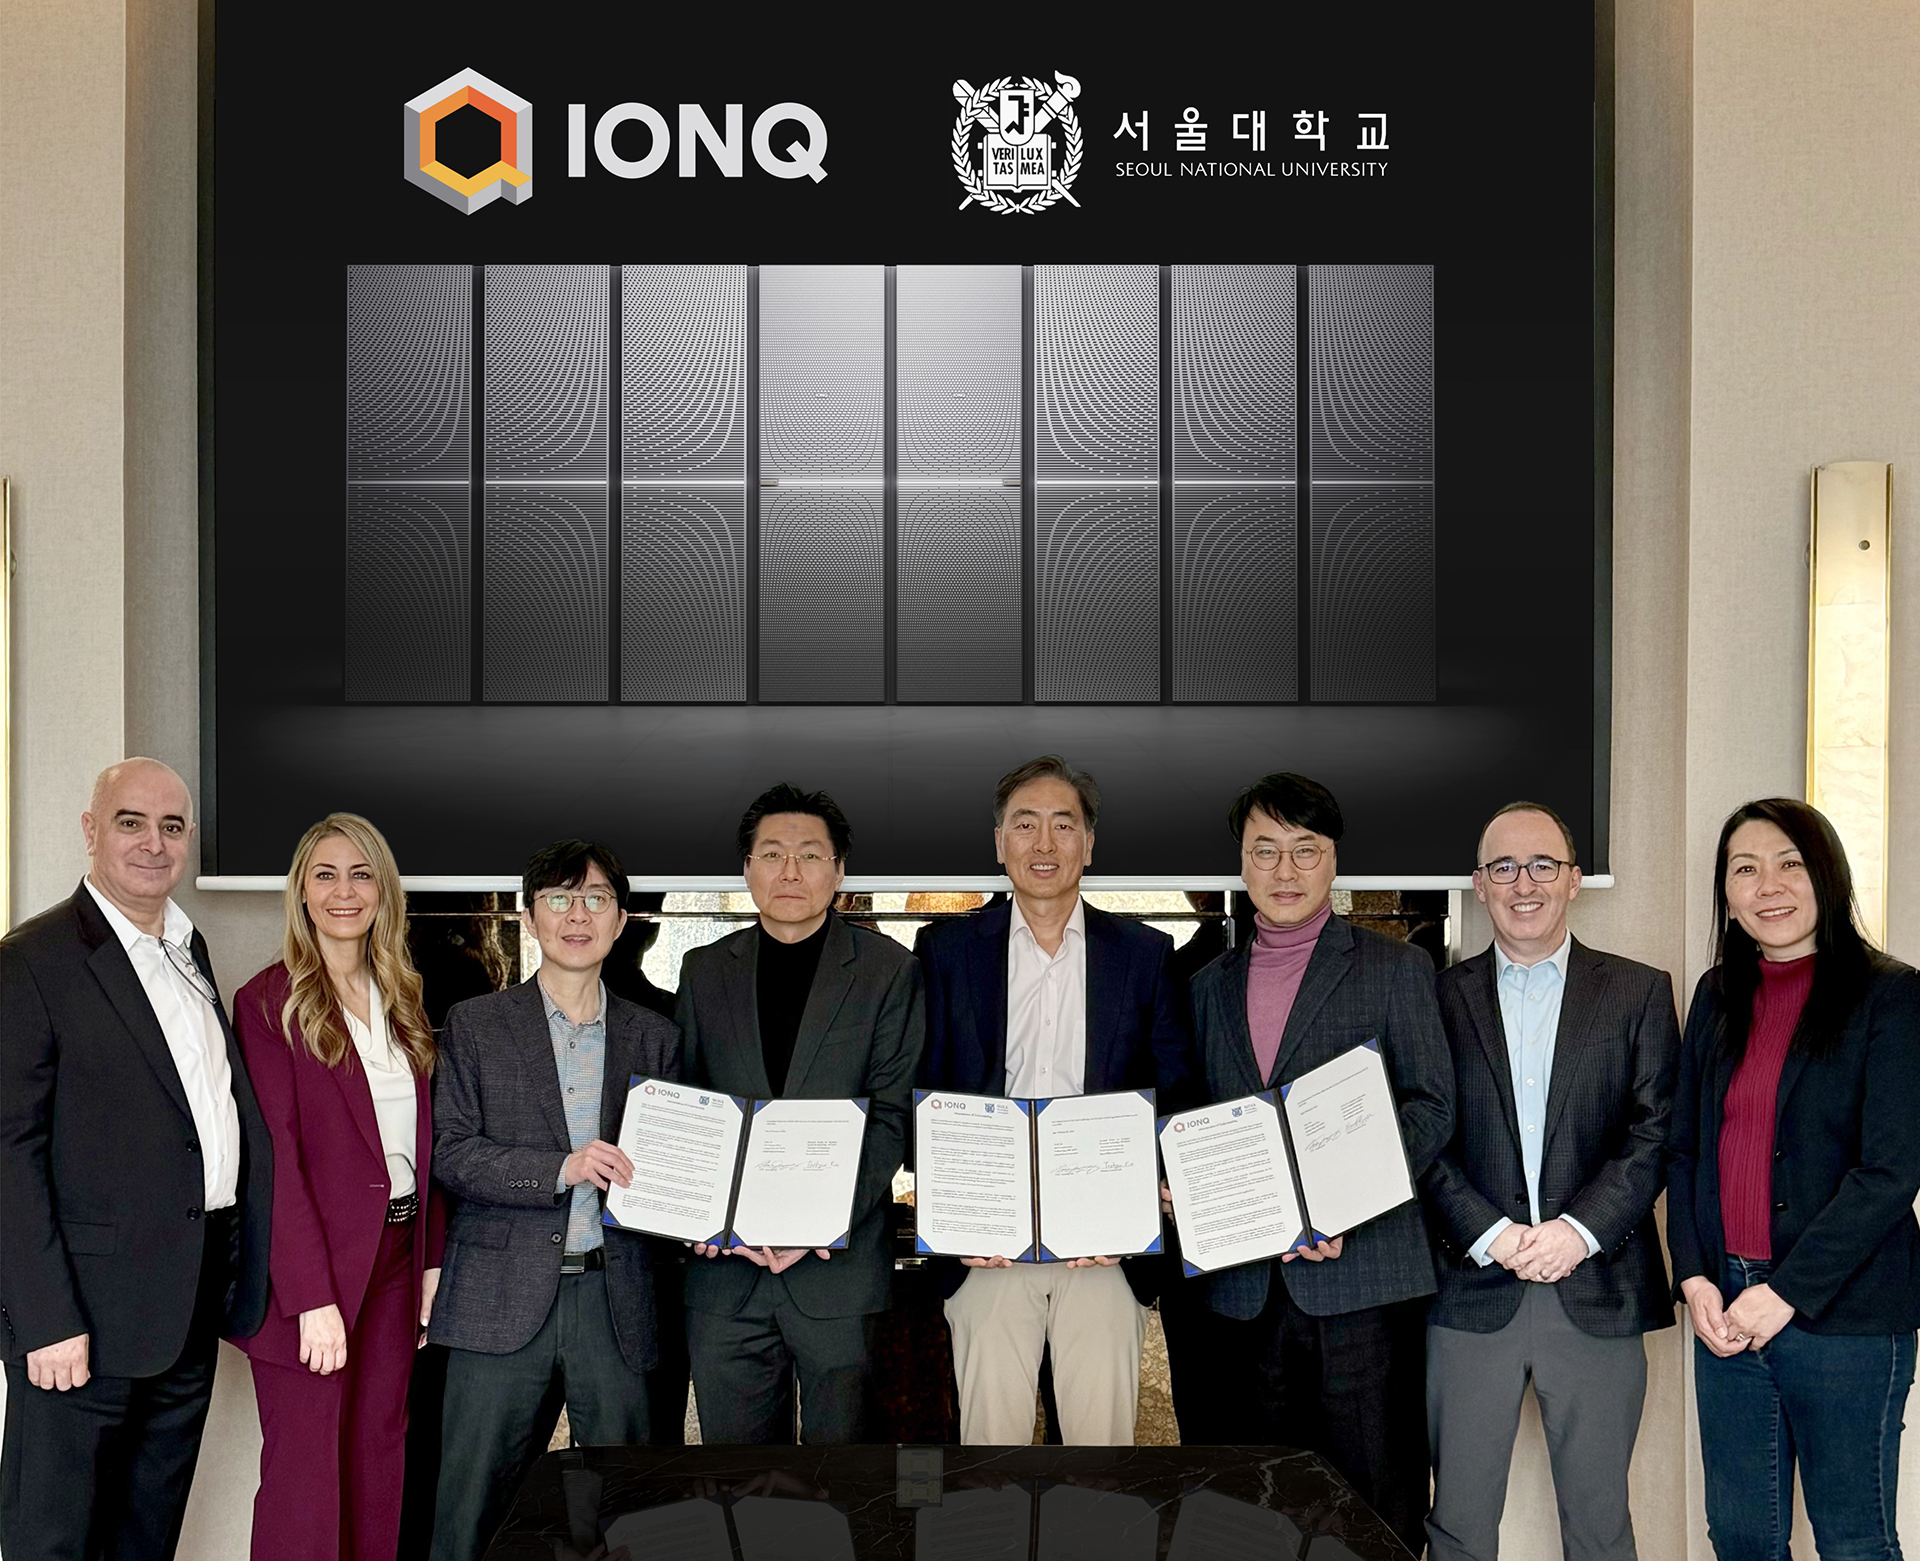 IonQ signs Memorandum of Understanding (MOU) to promote educational programs and joint research in quantum computing for Seoul National University